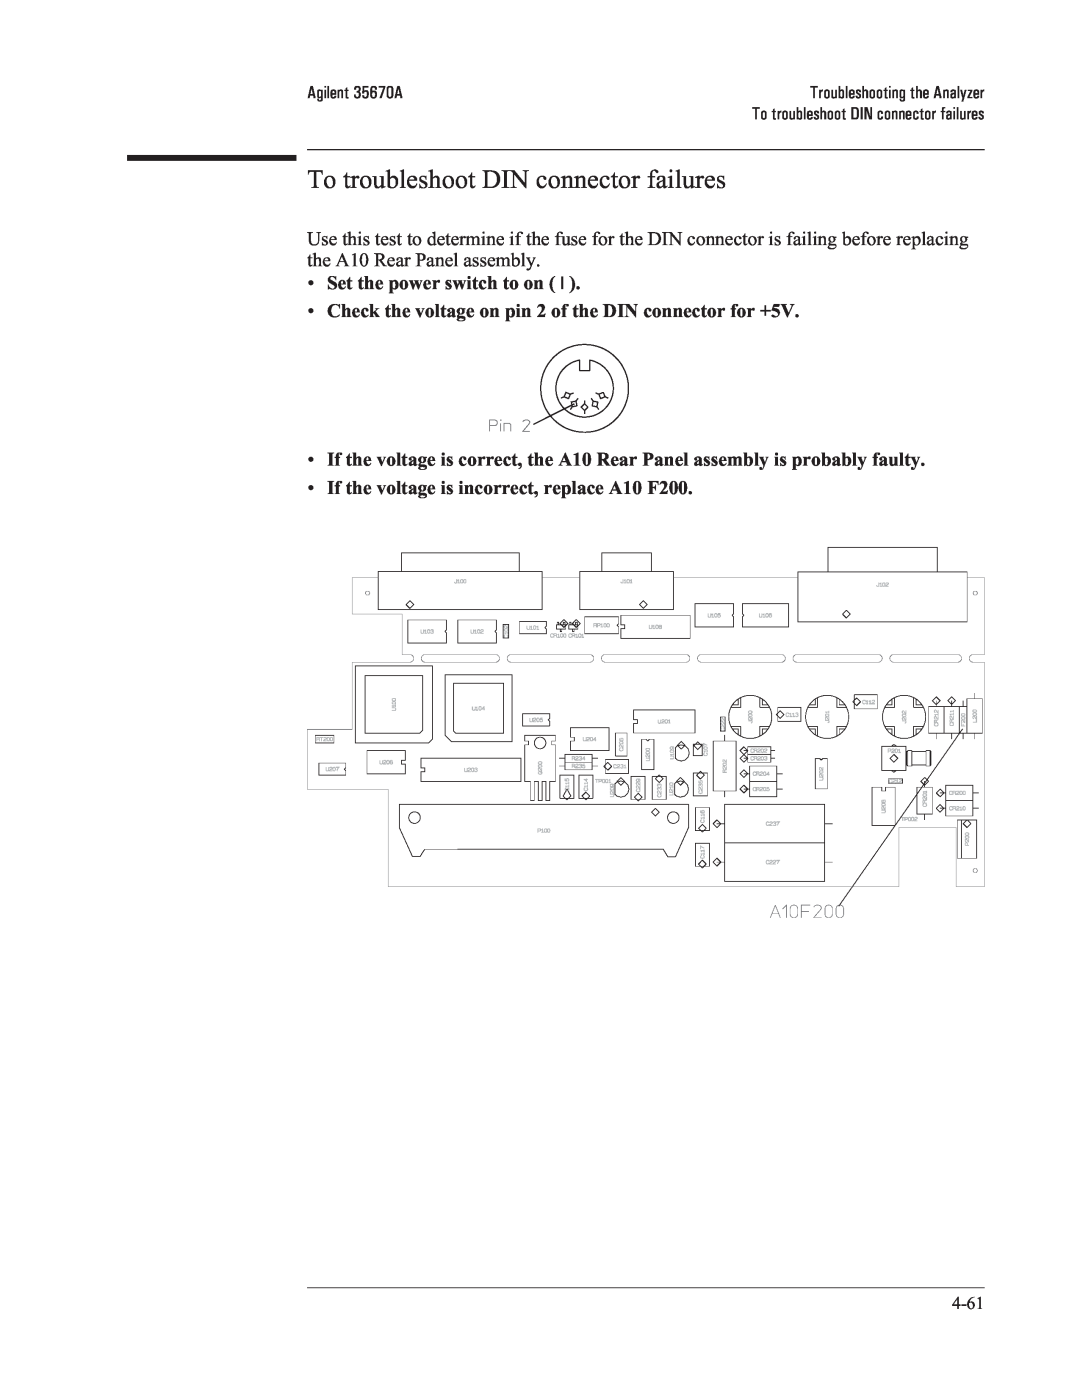 Agilent Technologies 35670-90066 manual To troubleshoot DIN connector failures 